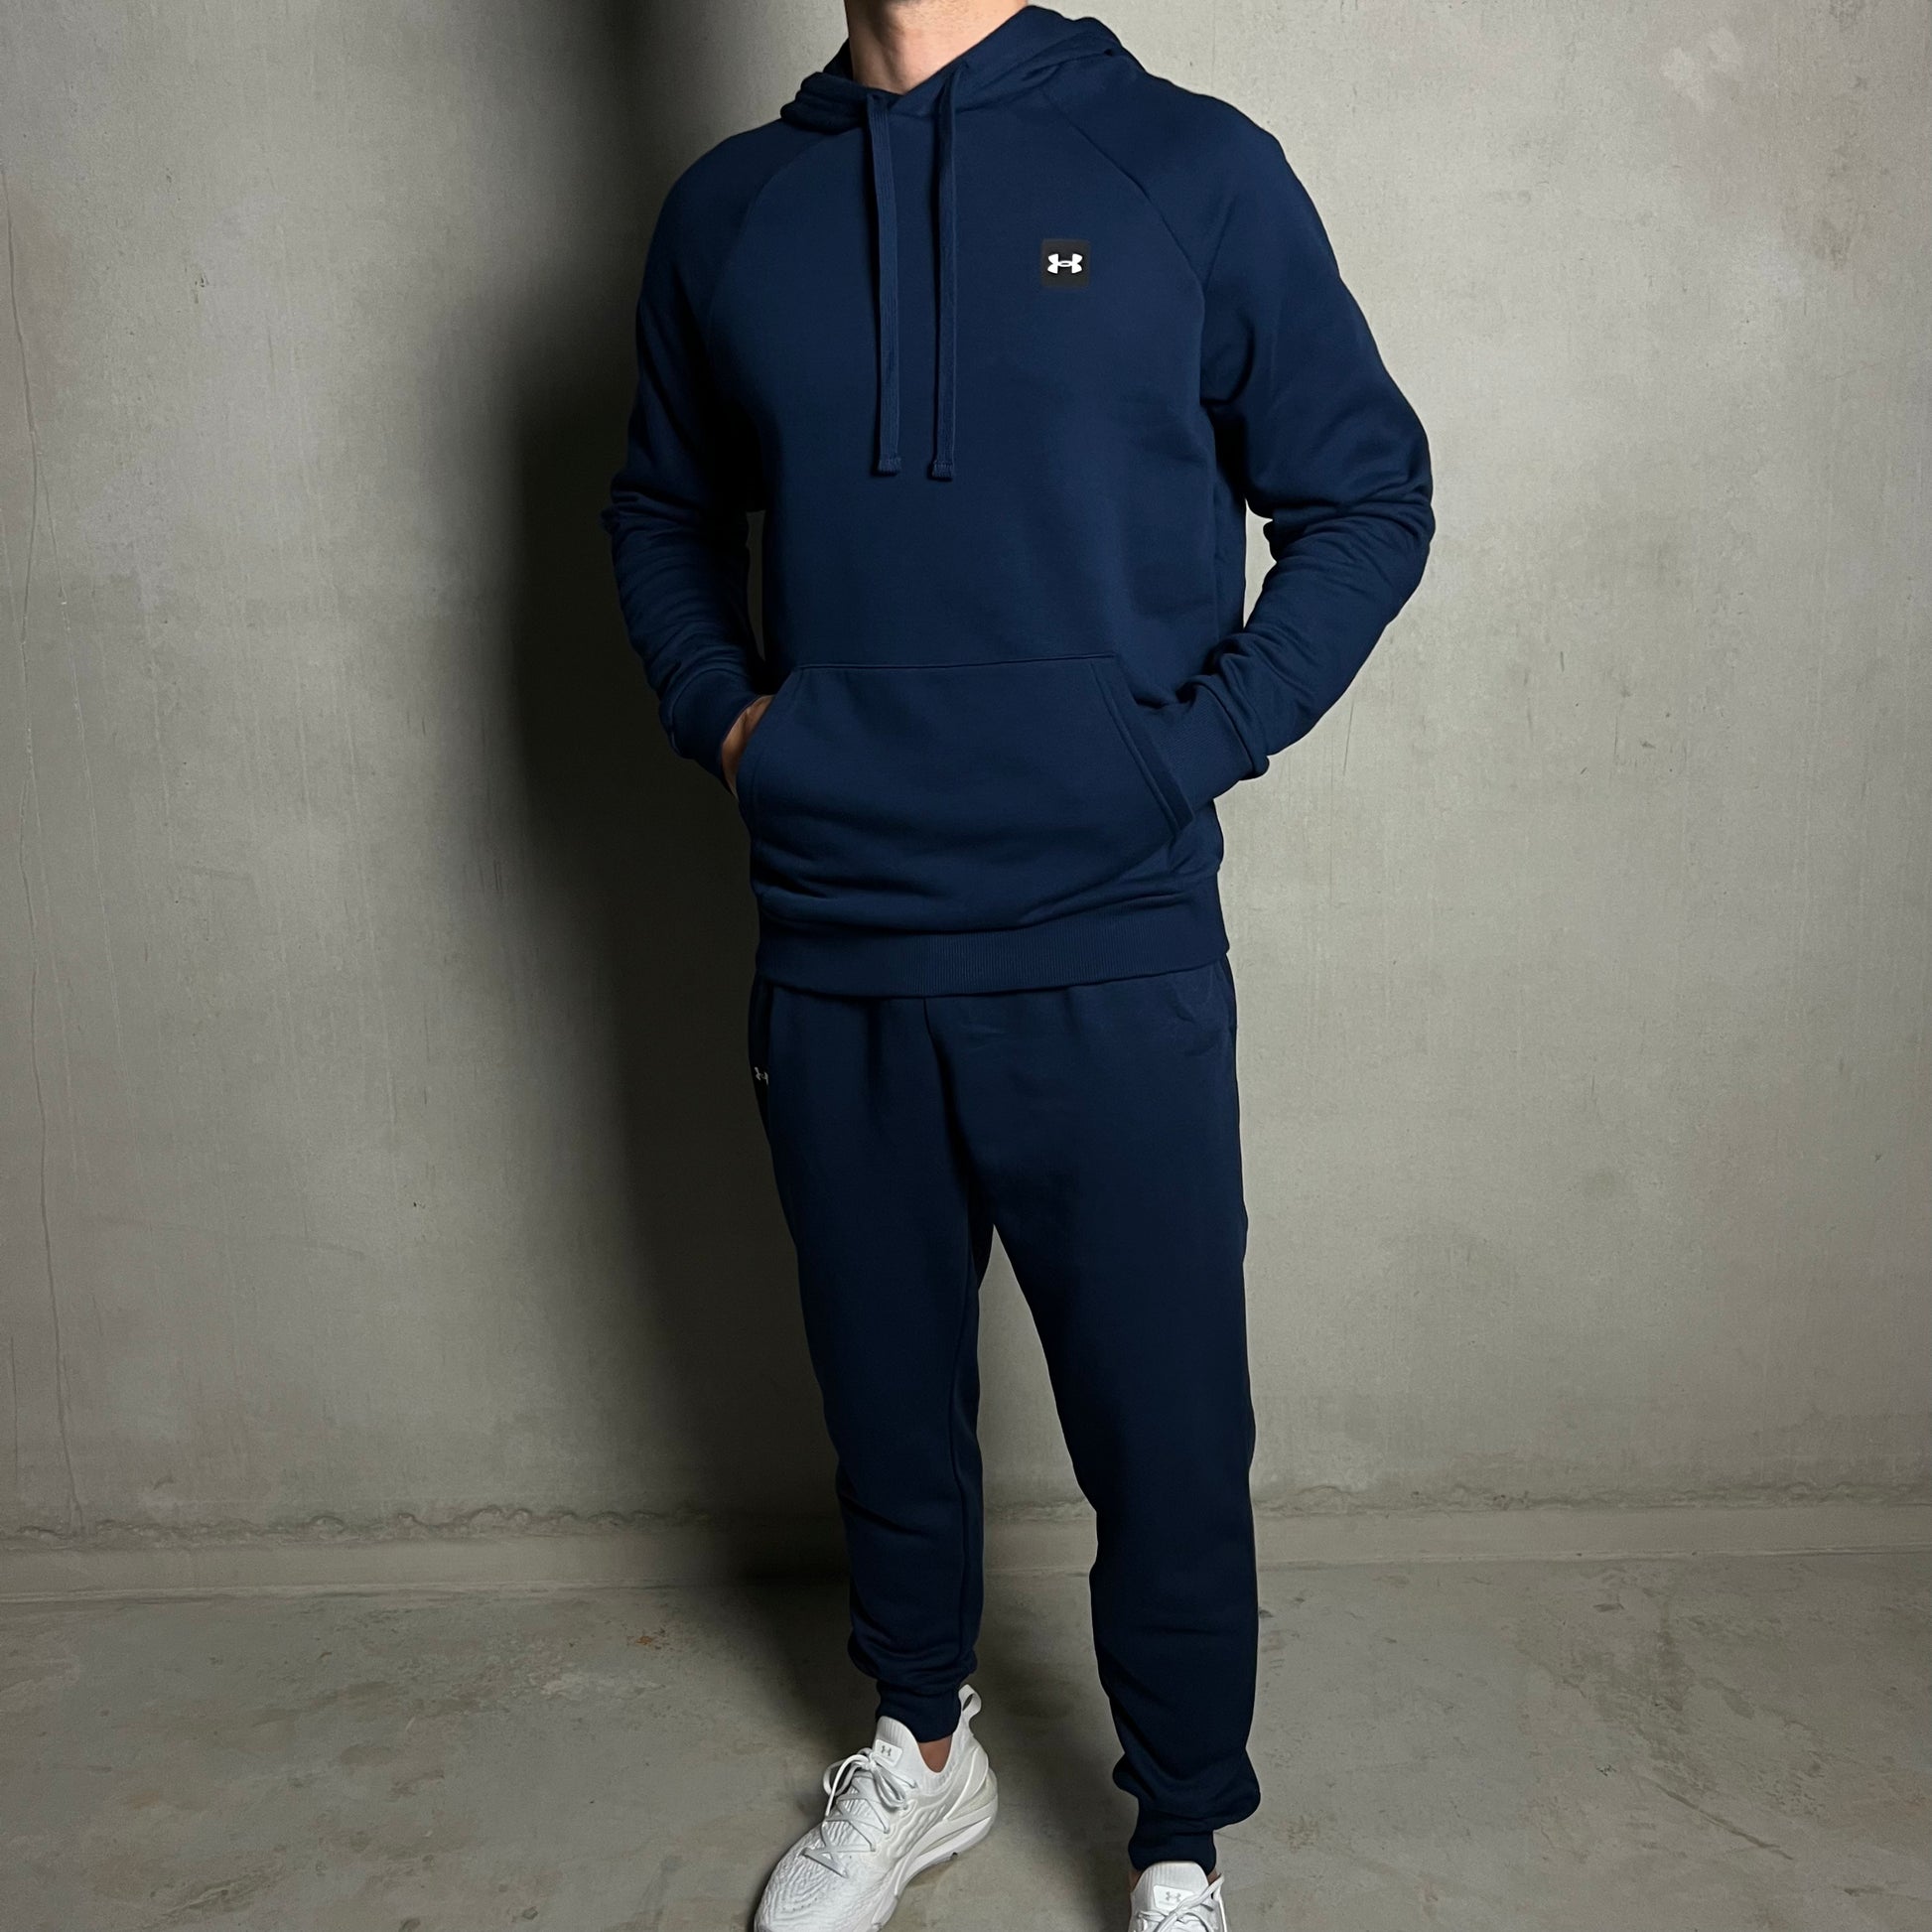 Hoodie Under – Blue Tracksuit 24motions Fleece Armour